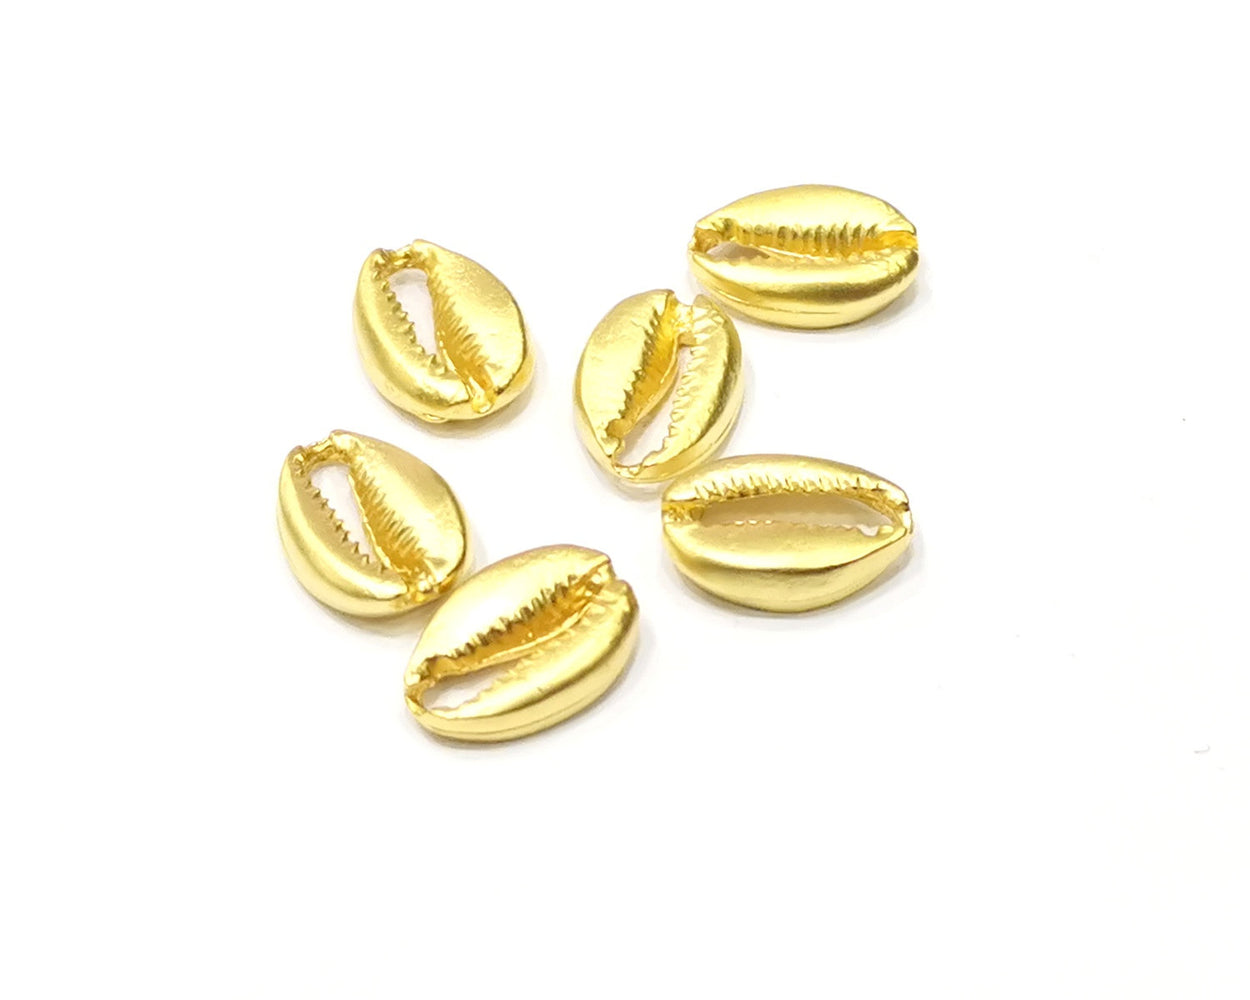 5 Cowrie Shell Charms Gold Charms Gold Plated Shell Charms (14x10mm)  G16926